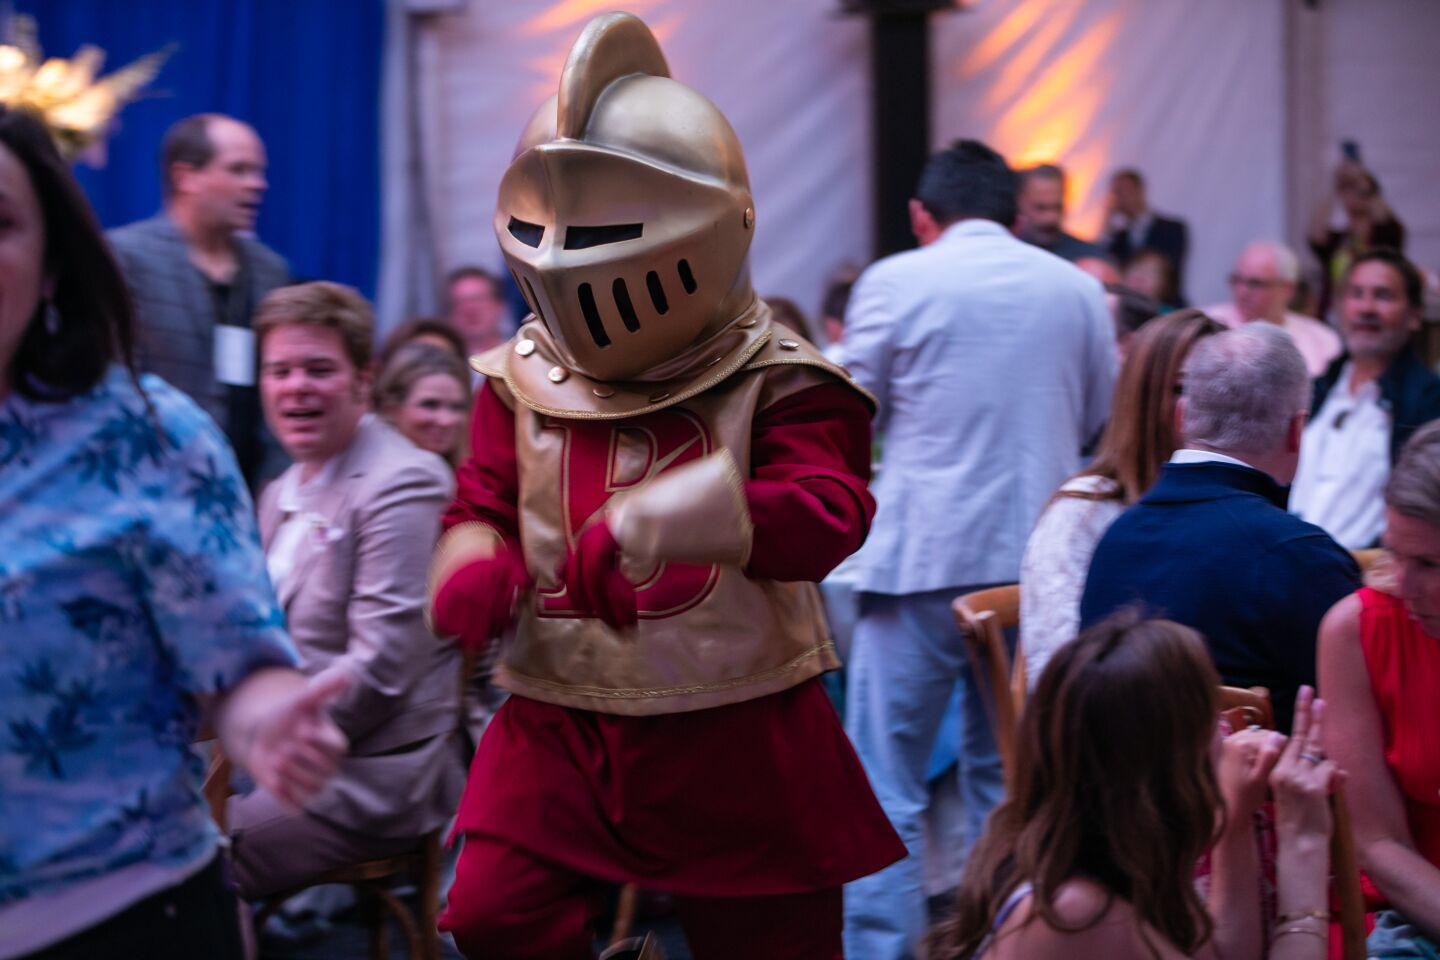 The Bishop's School Knight mascot makes an appearance at the school's gala April 23.